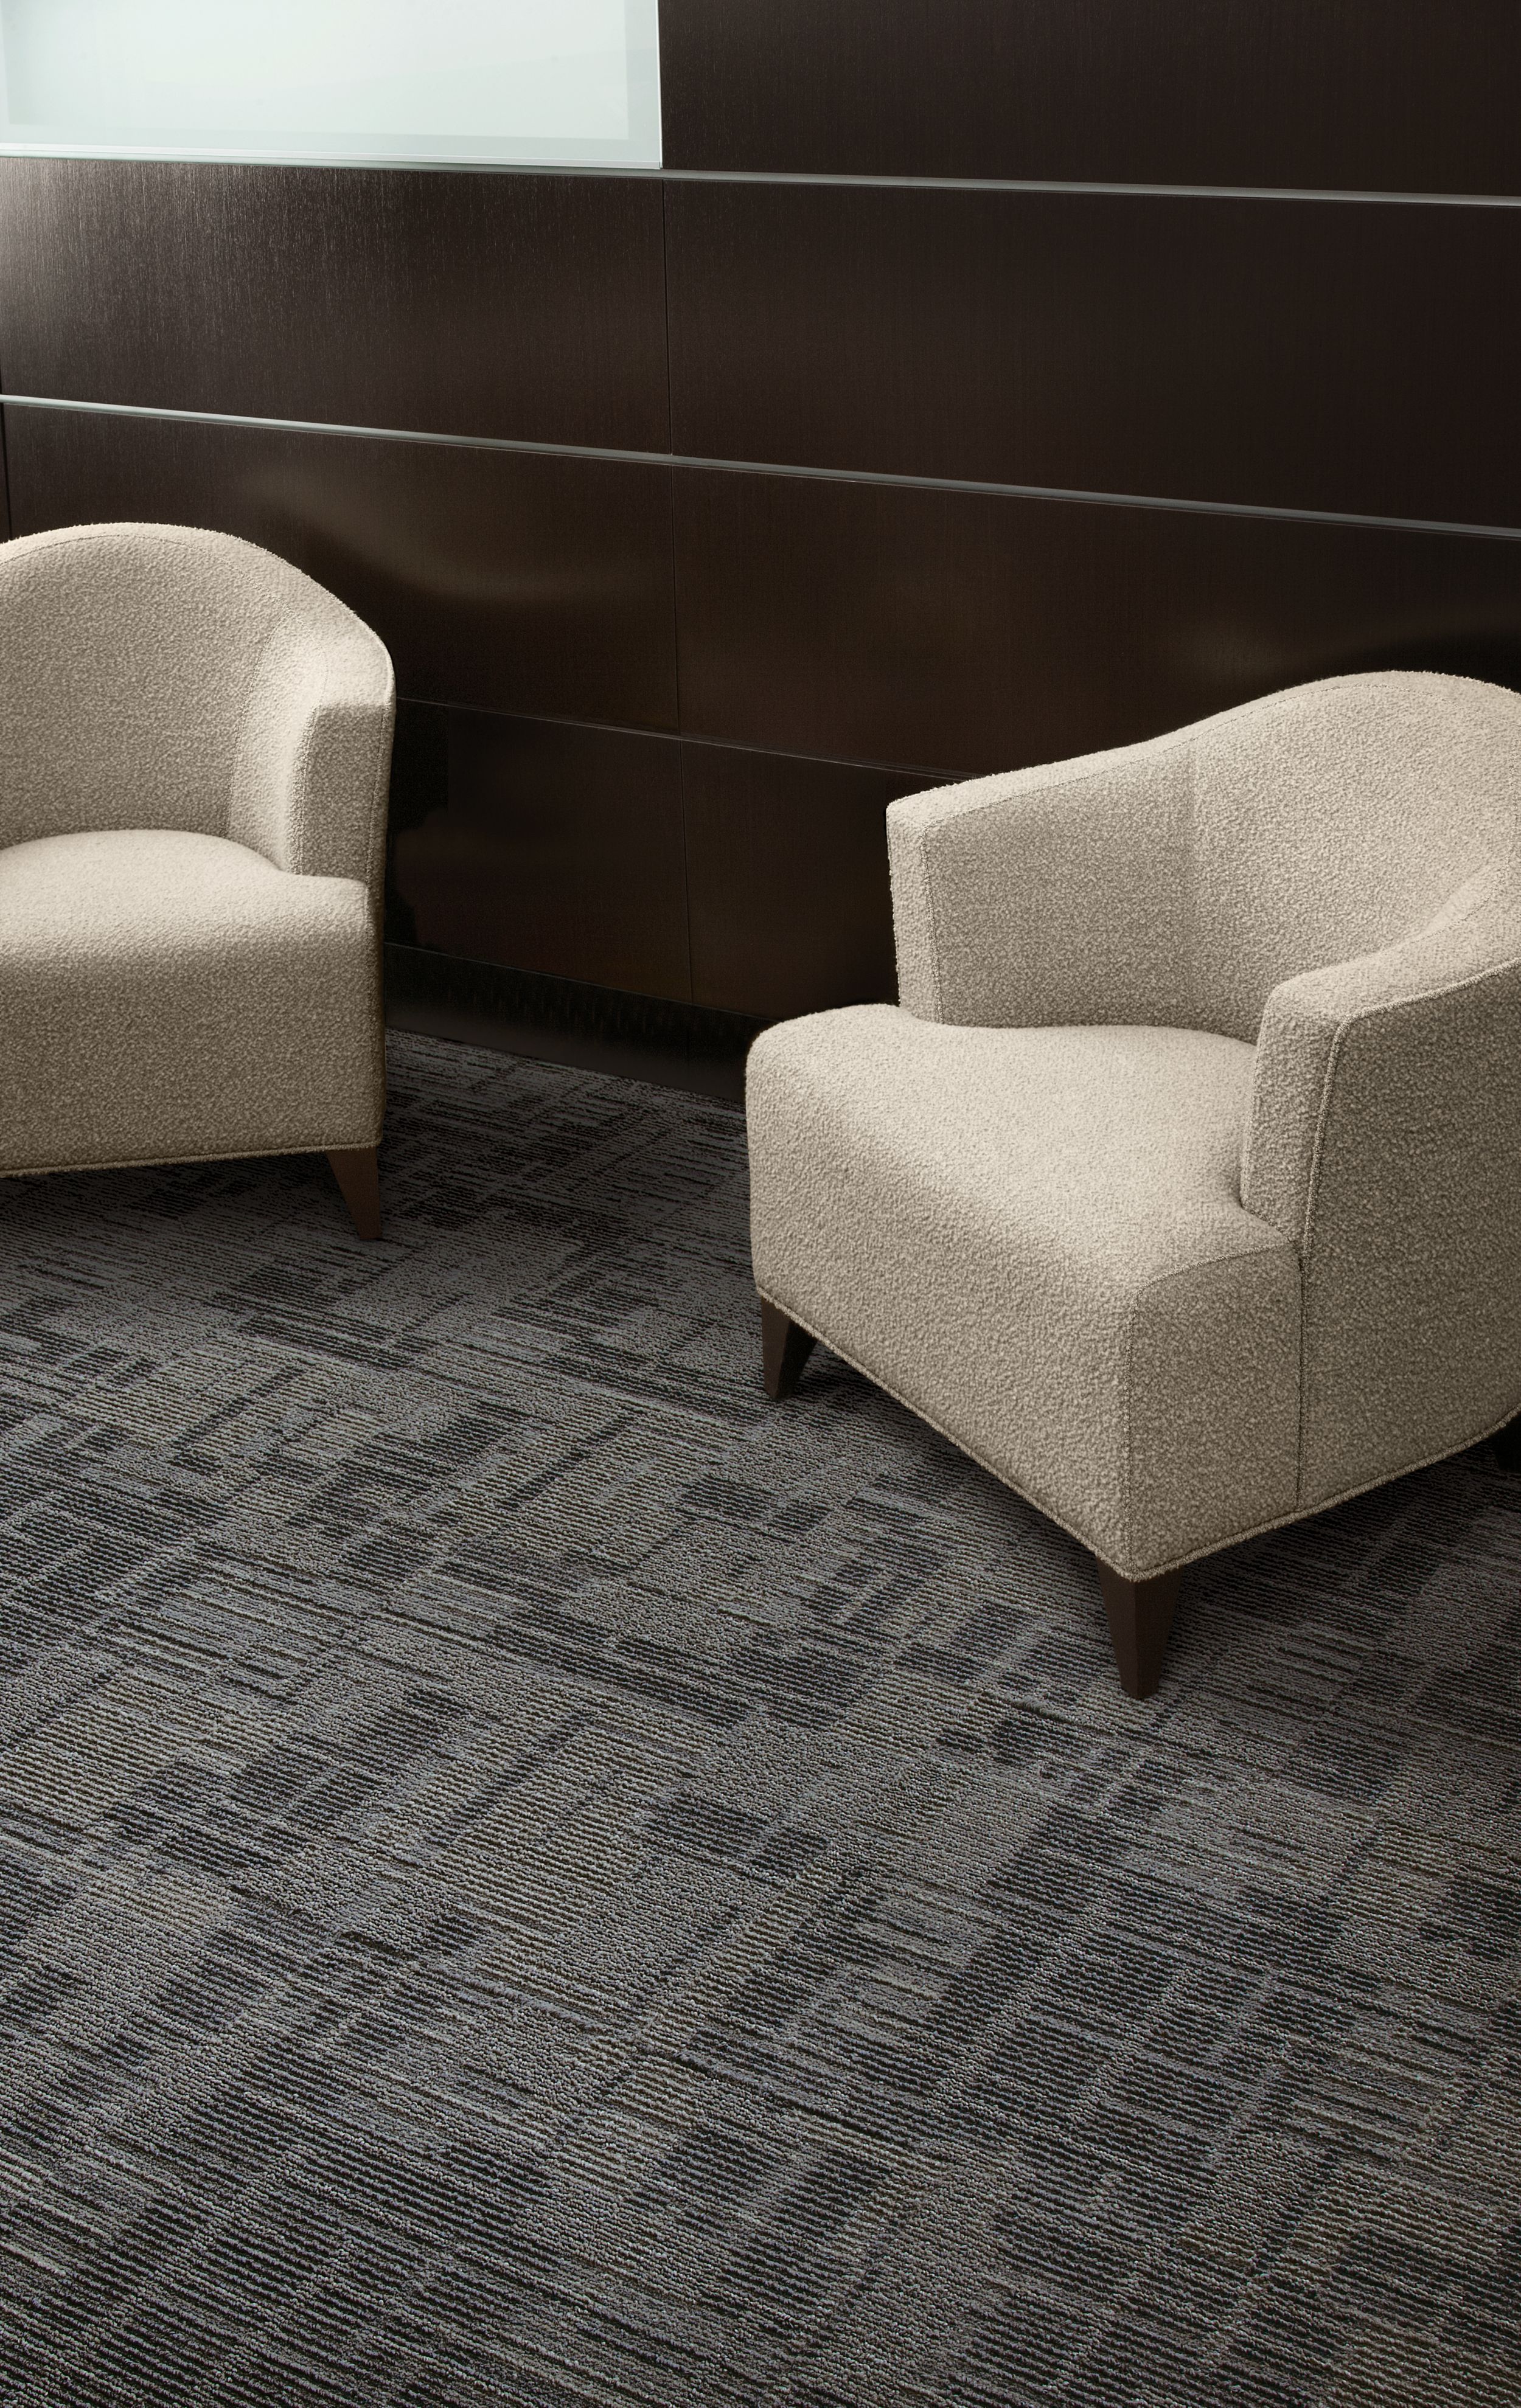 Interface Syncopation carpet tile in seating area with two chairs and wood walls imagen número 12